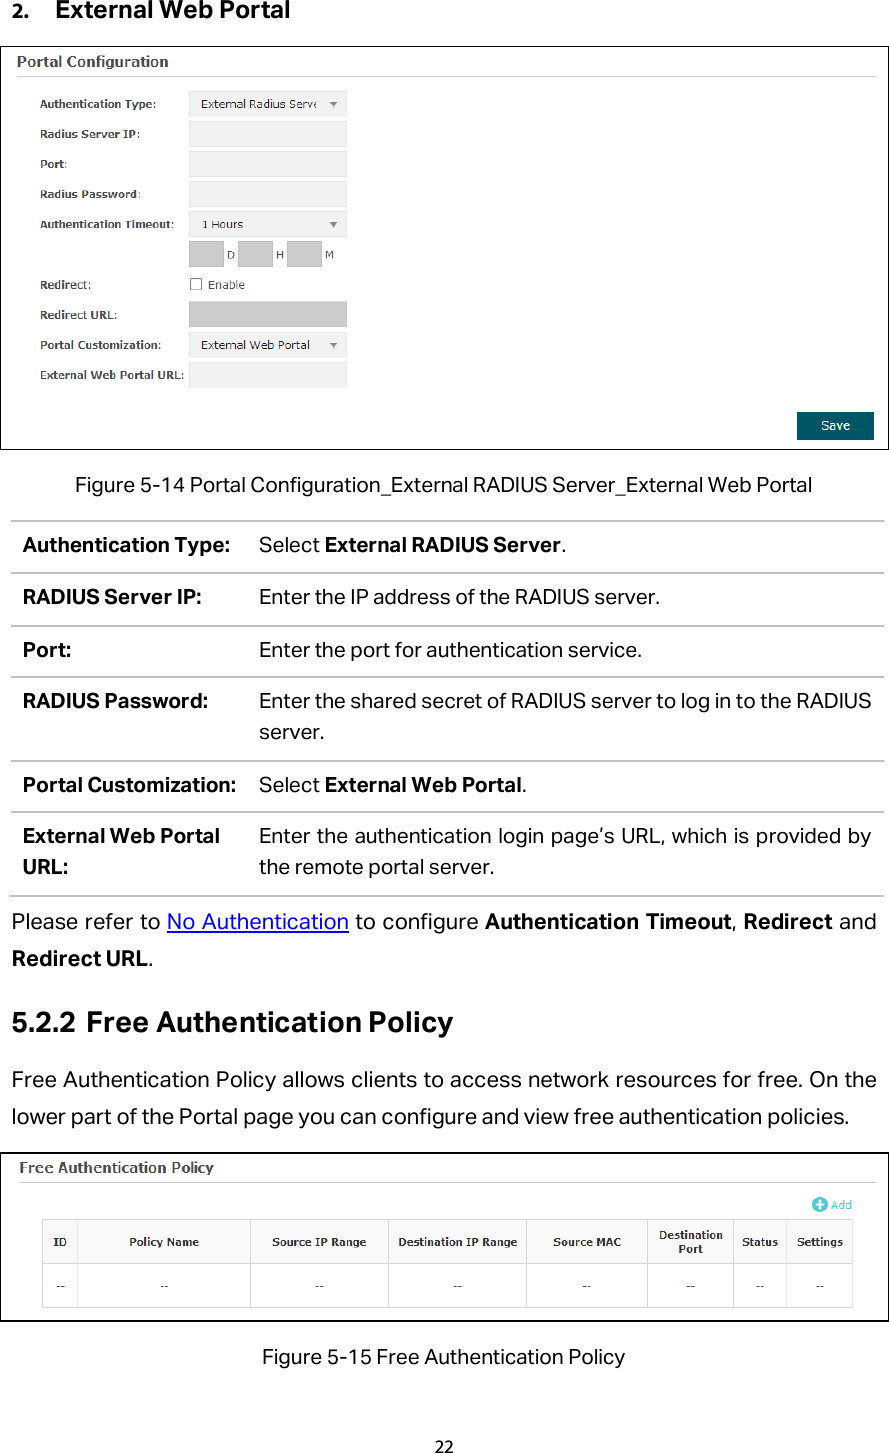 2. External Web Portal  Figure 5-14 Portal Configuration_External RADIUS Server_External Web Portal Authentication Type: Select External RADIUS Server. RADIUS Server IP: Enter the IP address of the RADIUS server. Port: Enter the port for authentication service. RADIUS Password: Enter the shared secret of RADIUS server to log in to the RADIUS server. Portal Customization: Select External Web Portal. External Web Portal URL: Enter the authentication login page’s URL, which is provided by the remote portal server. Please refer to No Authentication to configure Authentication Timeout, Redirect and Redirect URL. 5.2.2 Free Authentication Policy Free Authentication Policy allows clients to access network resources for free. On the lower part of the Portal page you can configure and view free authentication policies.    Figure 5-15 Free Authentication Policy 22  